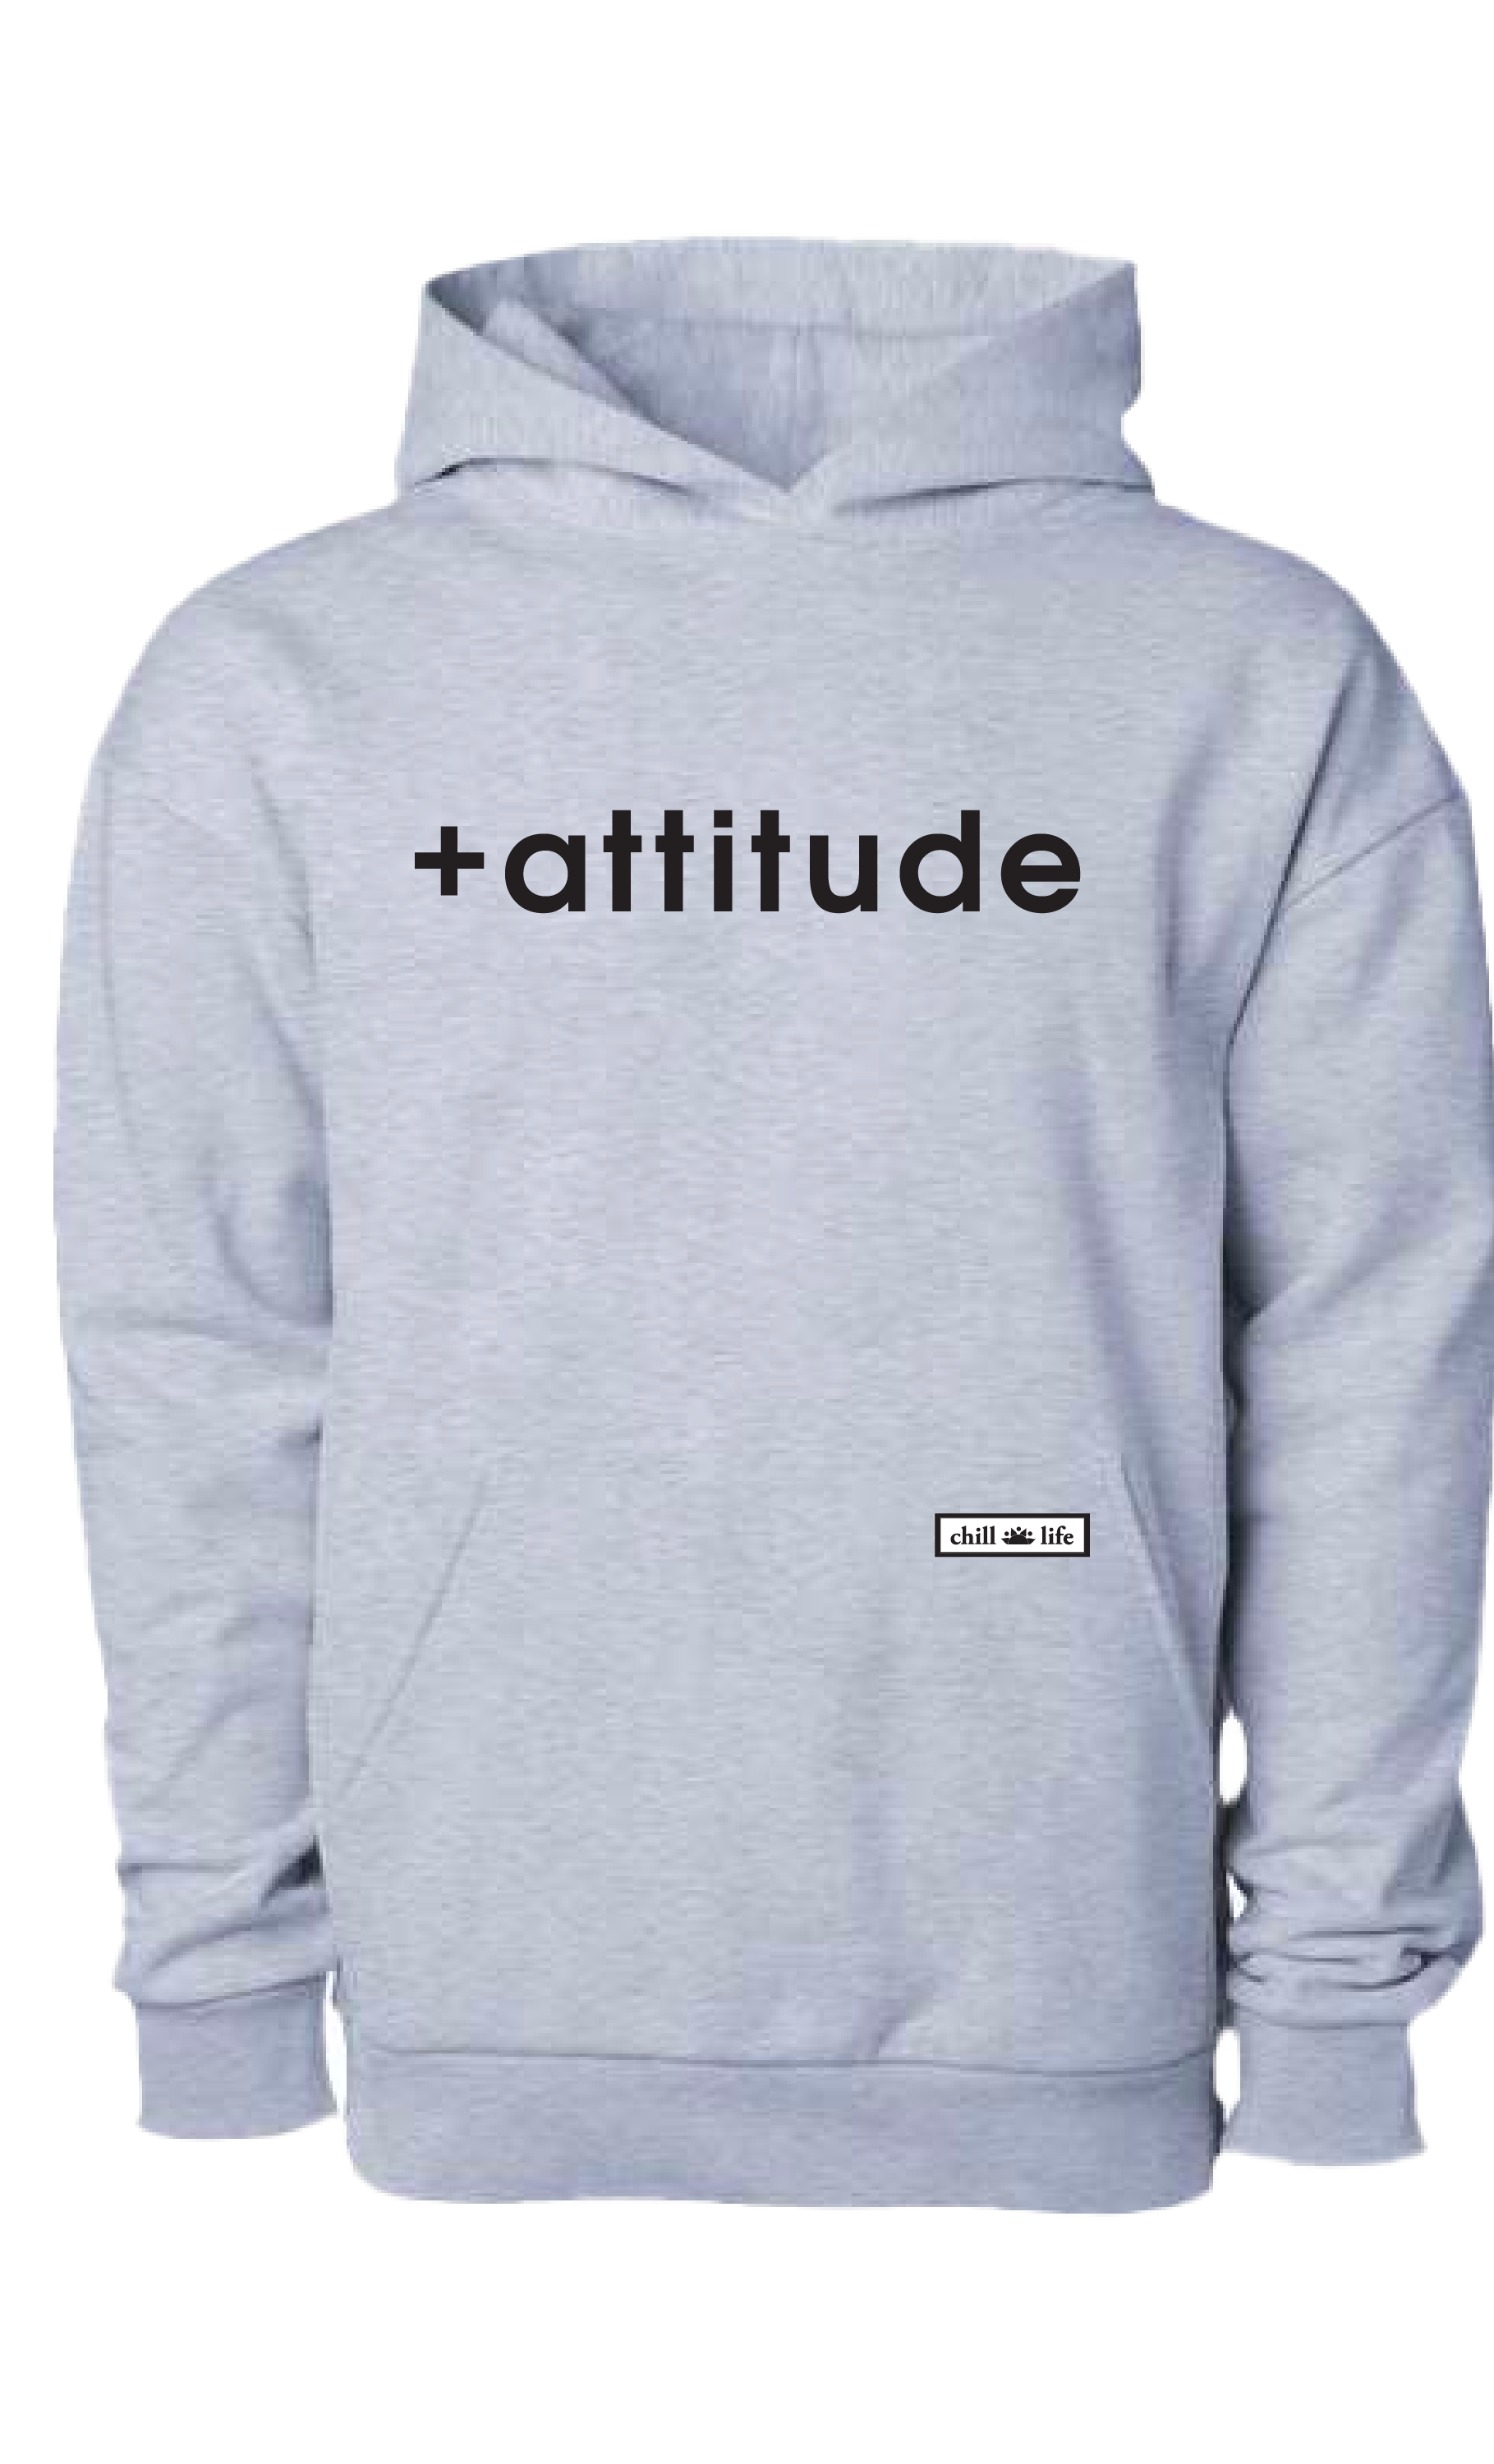 +attitude Hoodie - Chill Grey chill life style